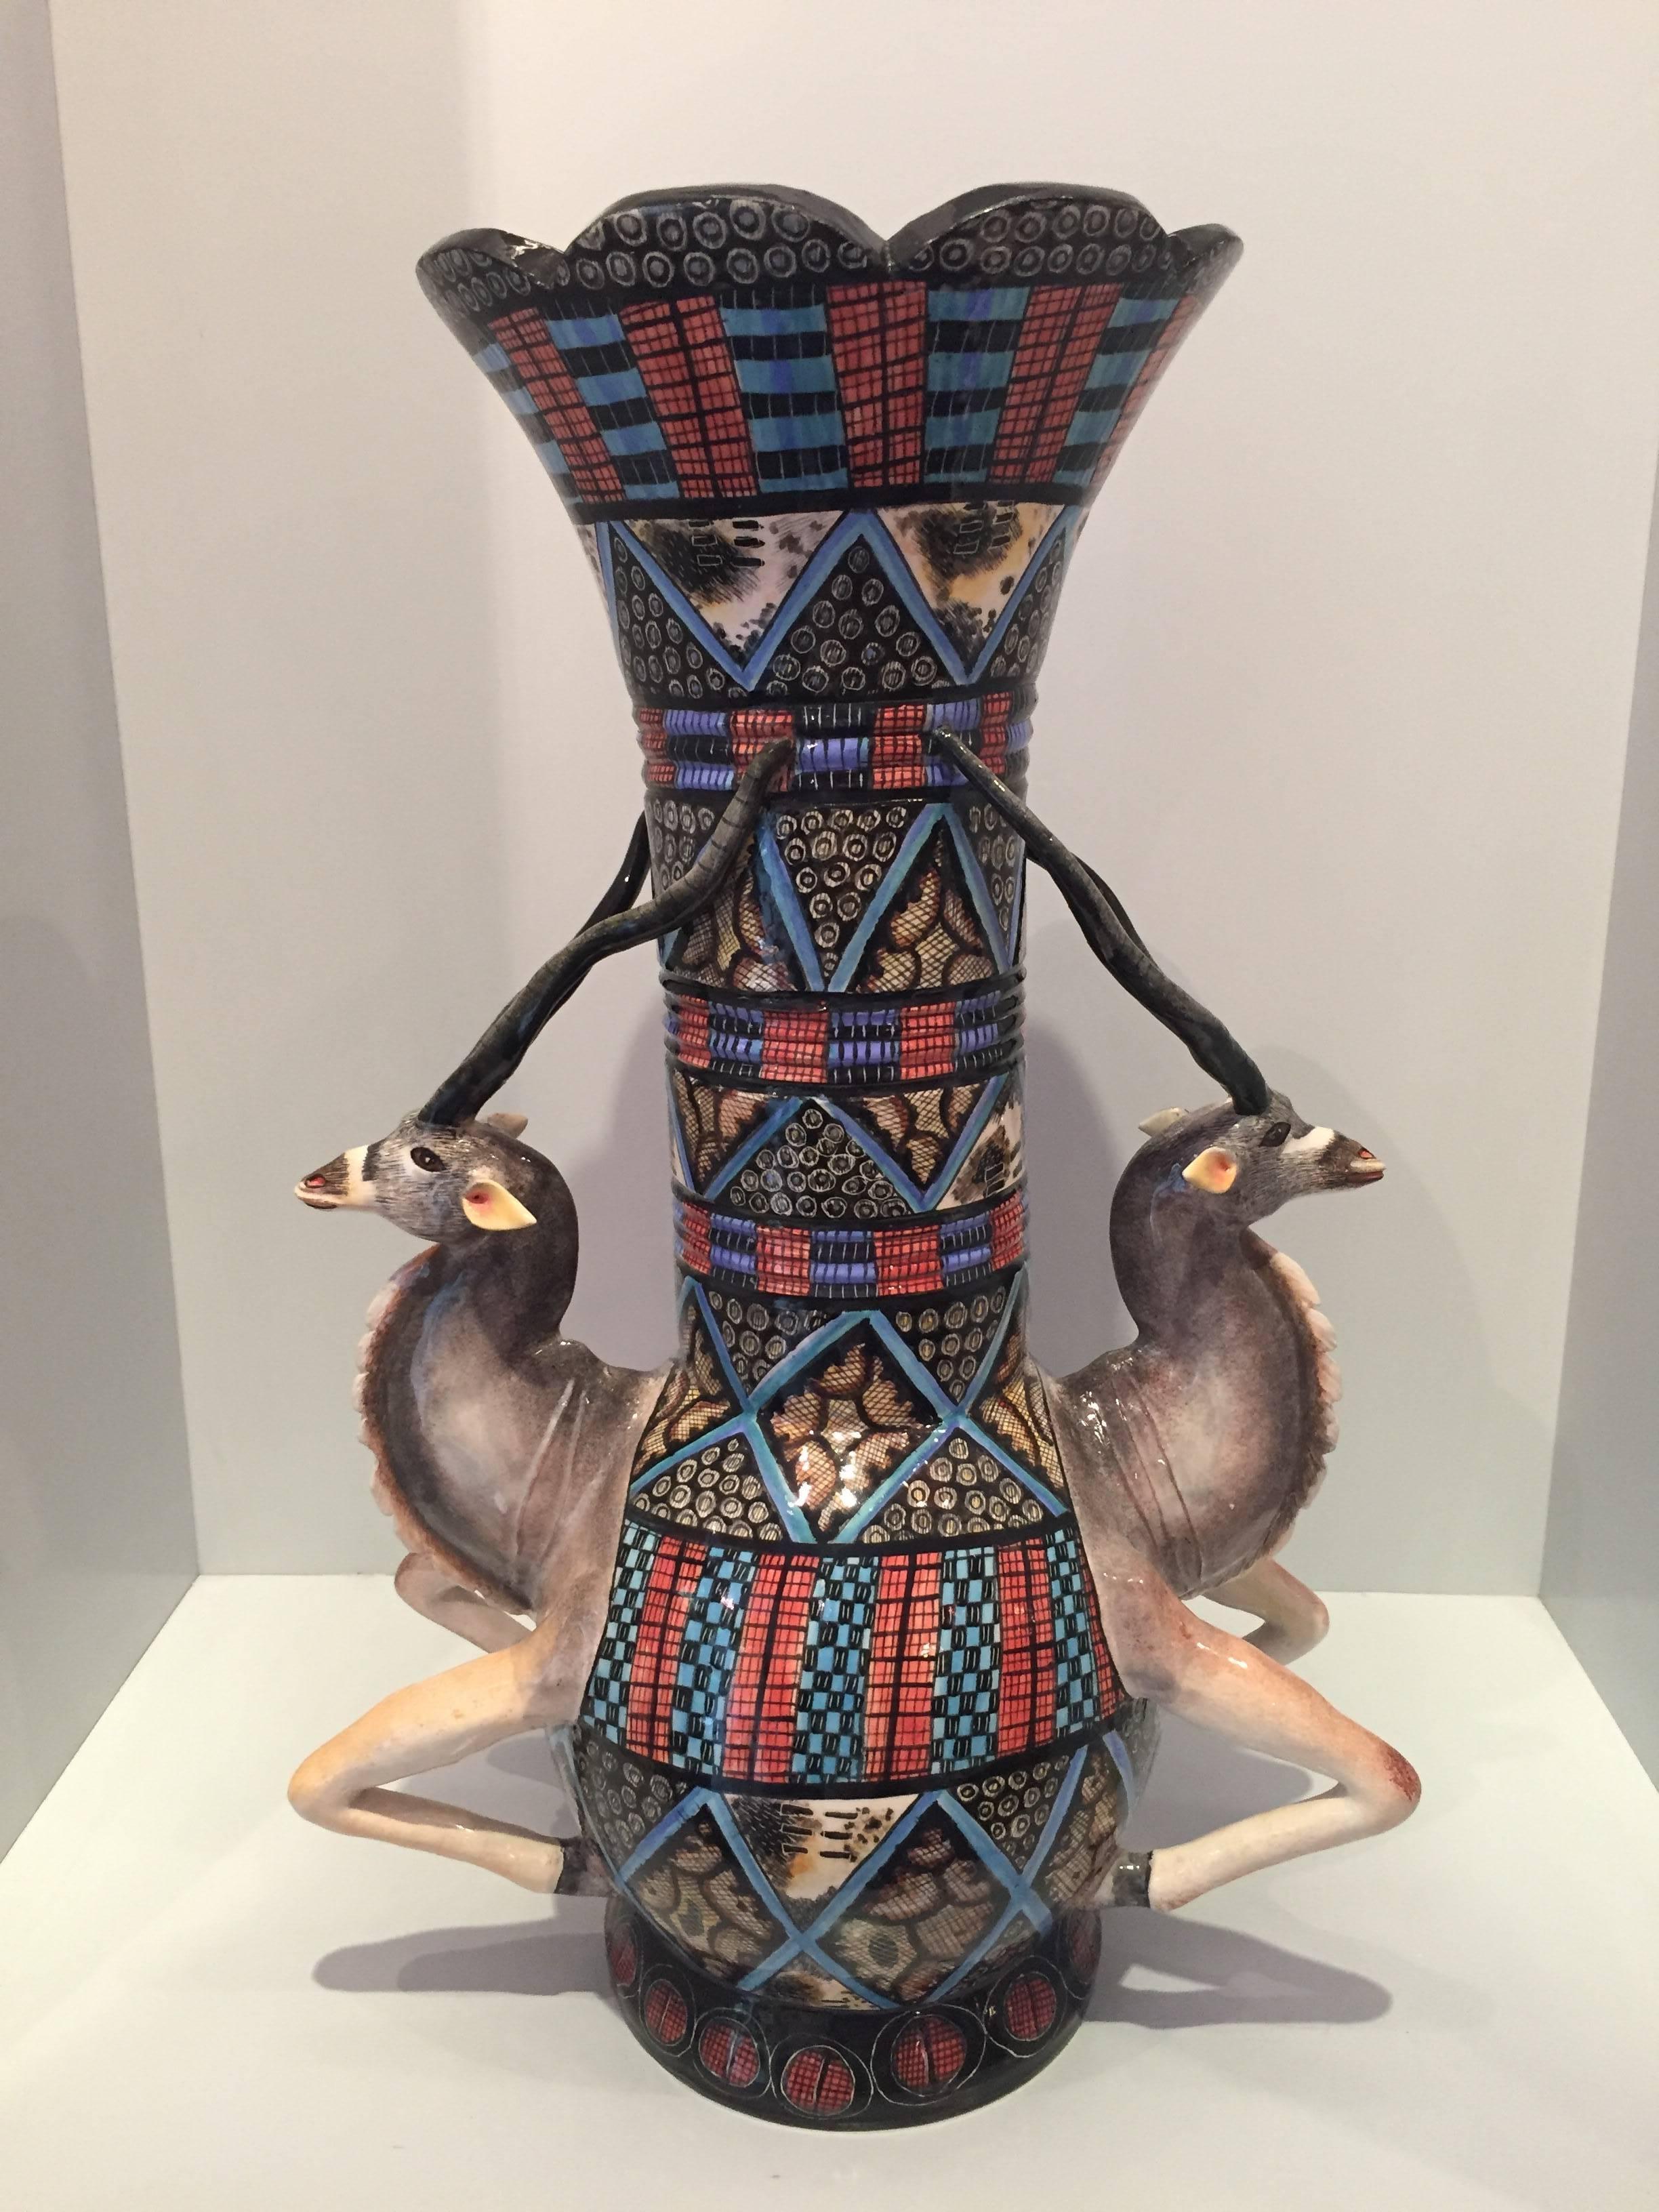 Kudu vase AAA, ceramic by Ardmore from South Africa. Sculpted by Sabelo Khoza, painted by Virginia Xaba. 

Ardmore ceramic art was established by Fee Halsted and is situated in the foothills of the Drakensberg Mountains of KwaZulu-Natal where